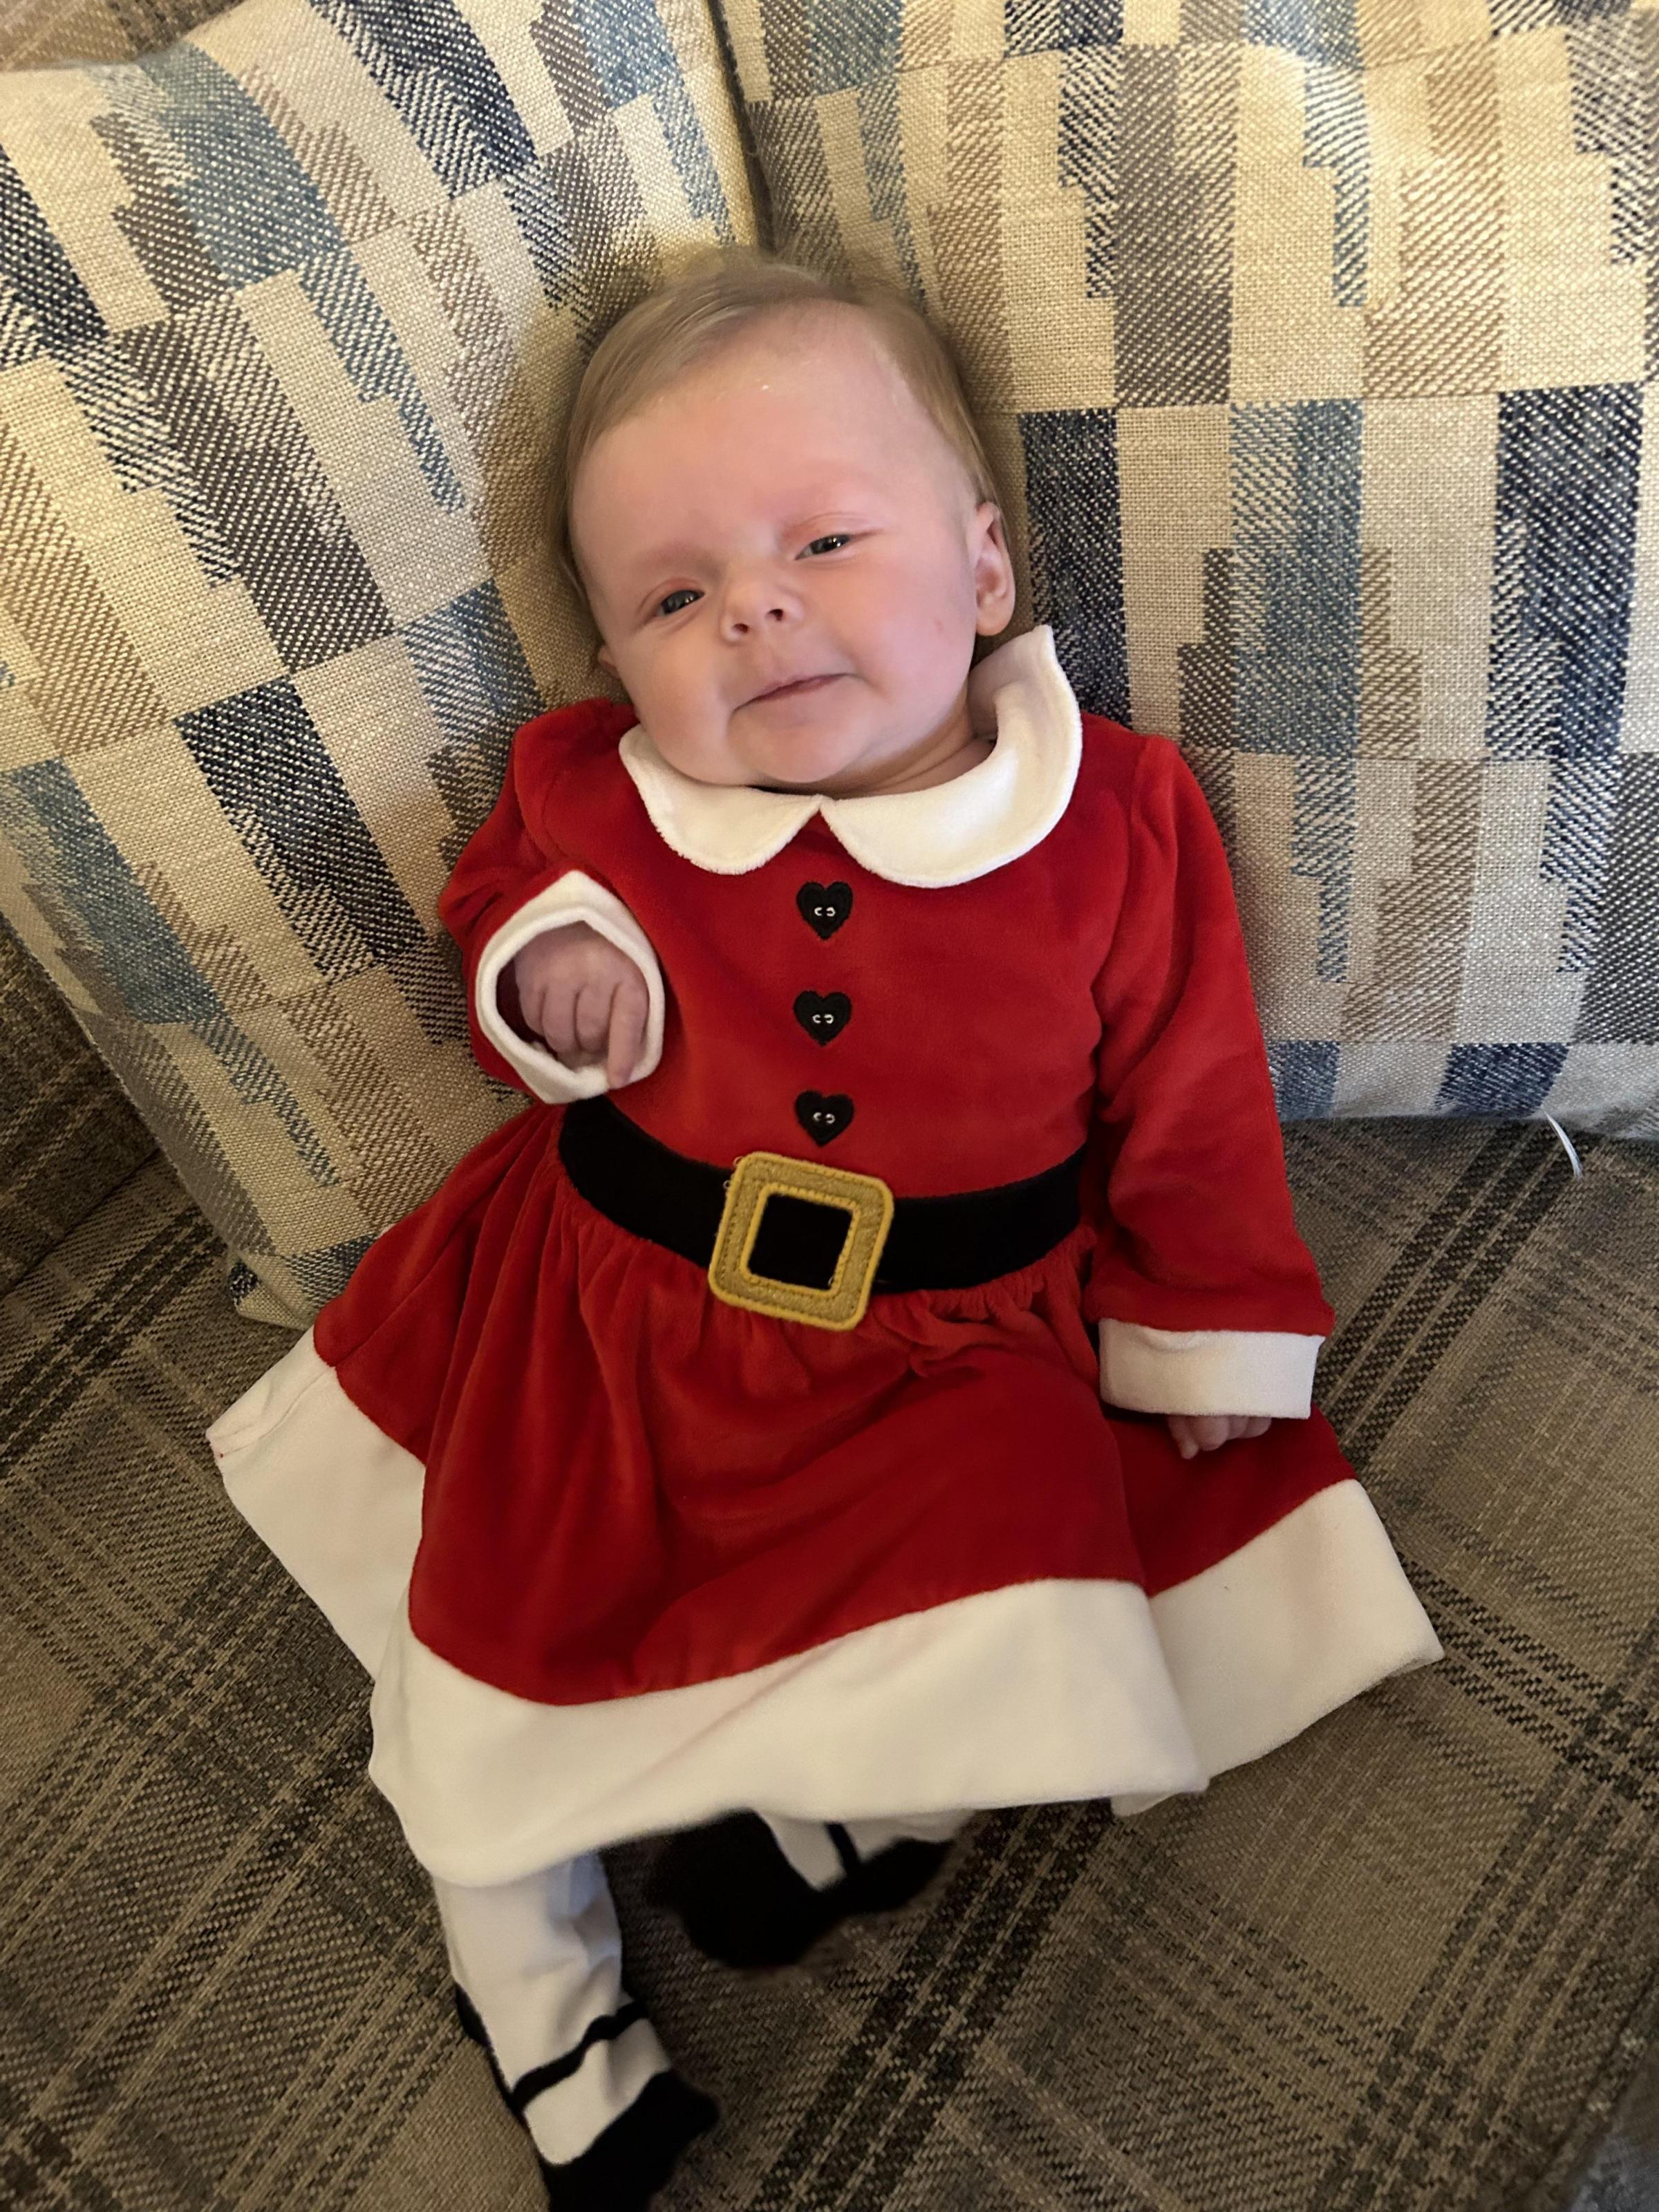 Adele Mackie, from Mold: Were so excited for Adalines first Christmas! Shes all dressed up here ready to celebrate at her baby group.